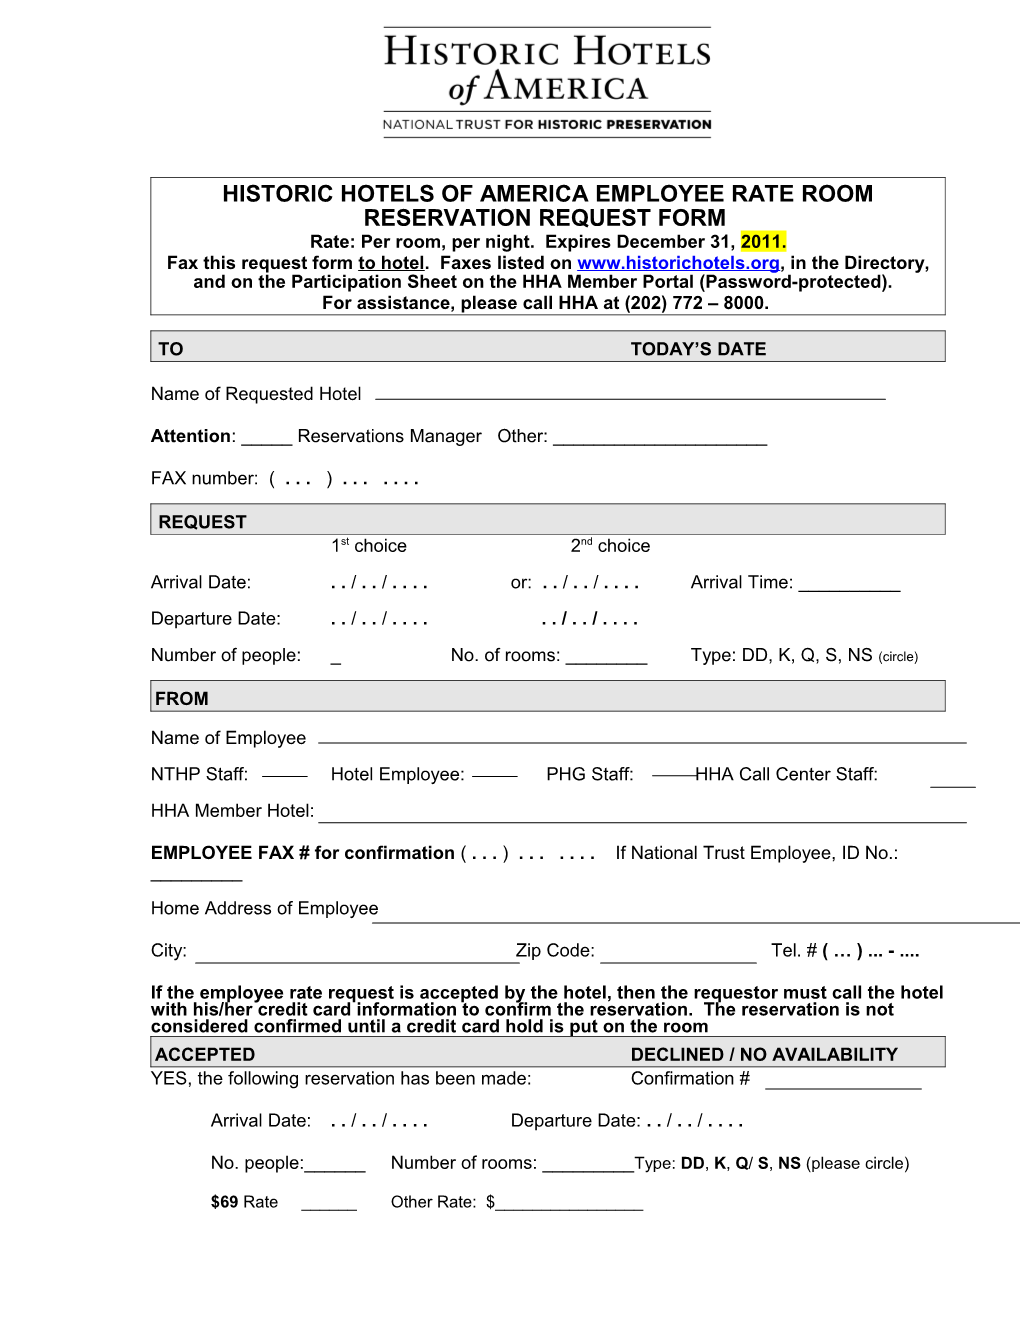 Historic Hotels of America Employee Rate Room Reservation Request Form